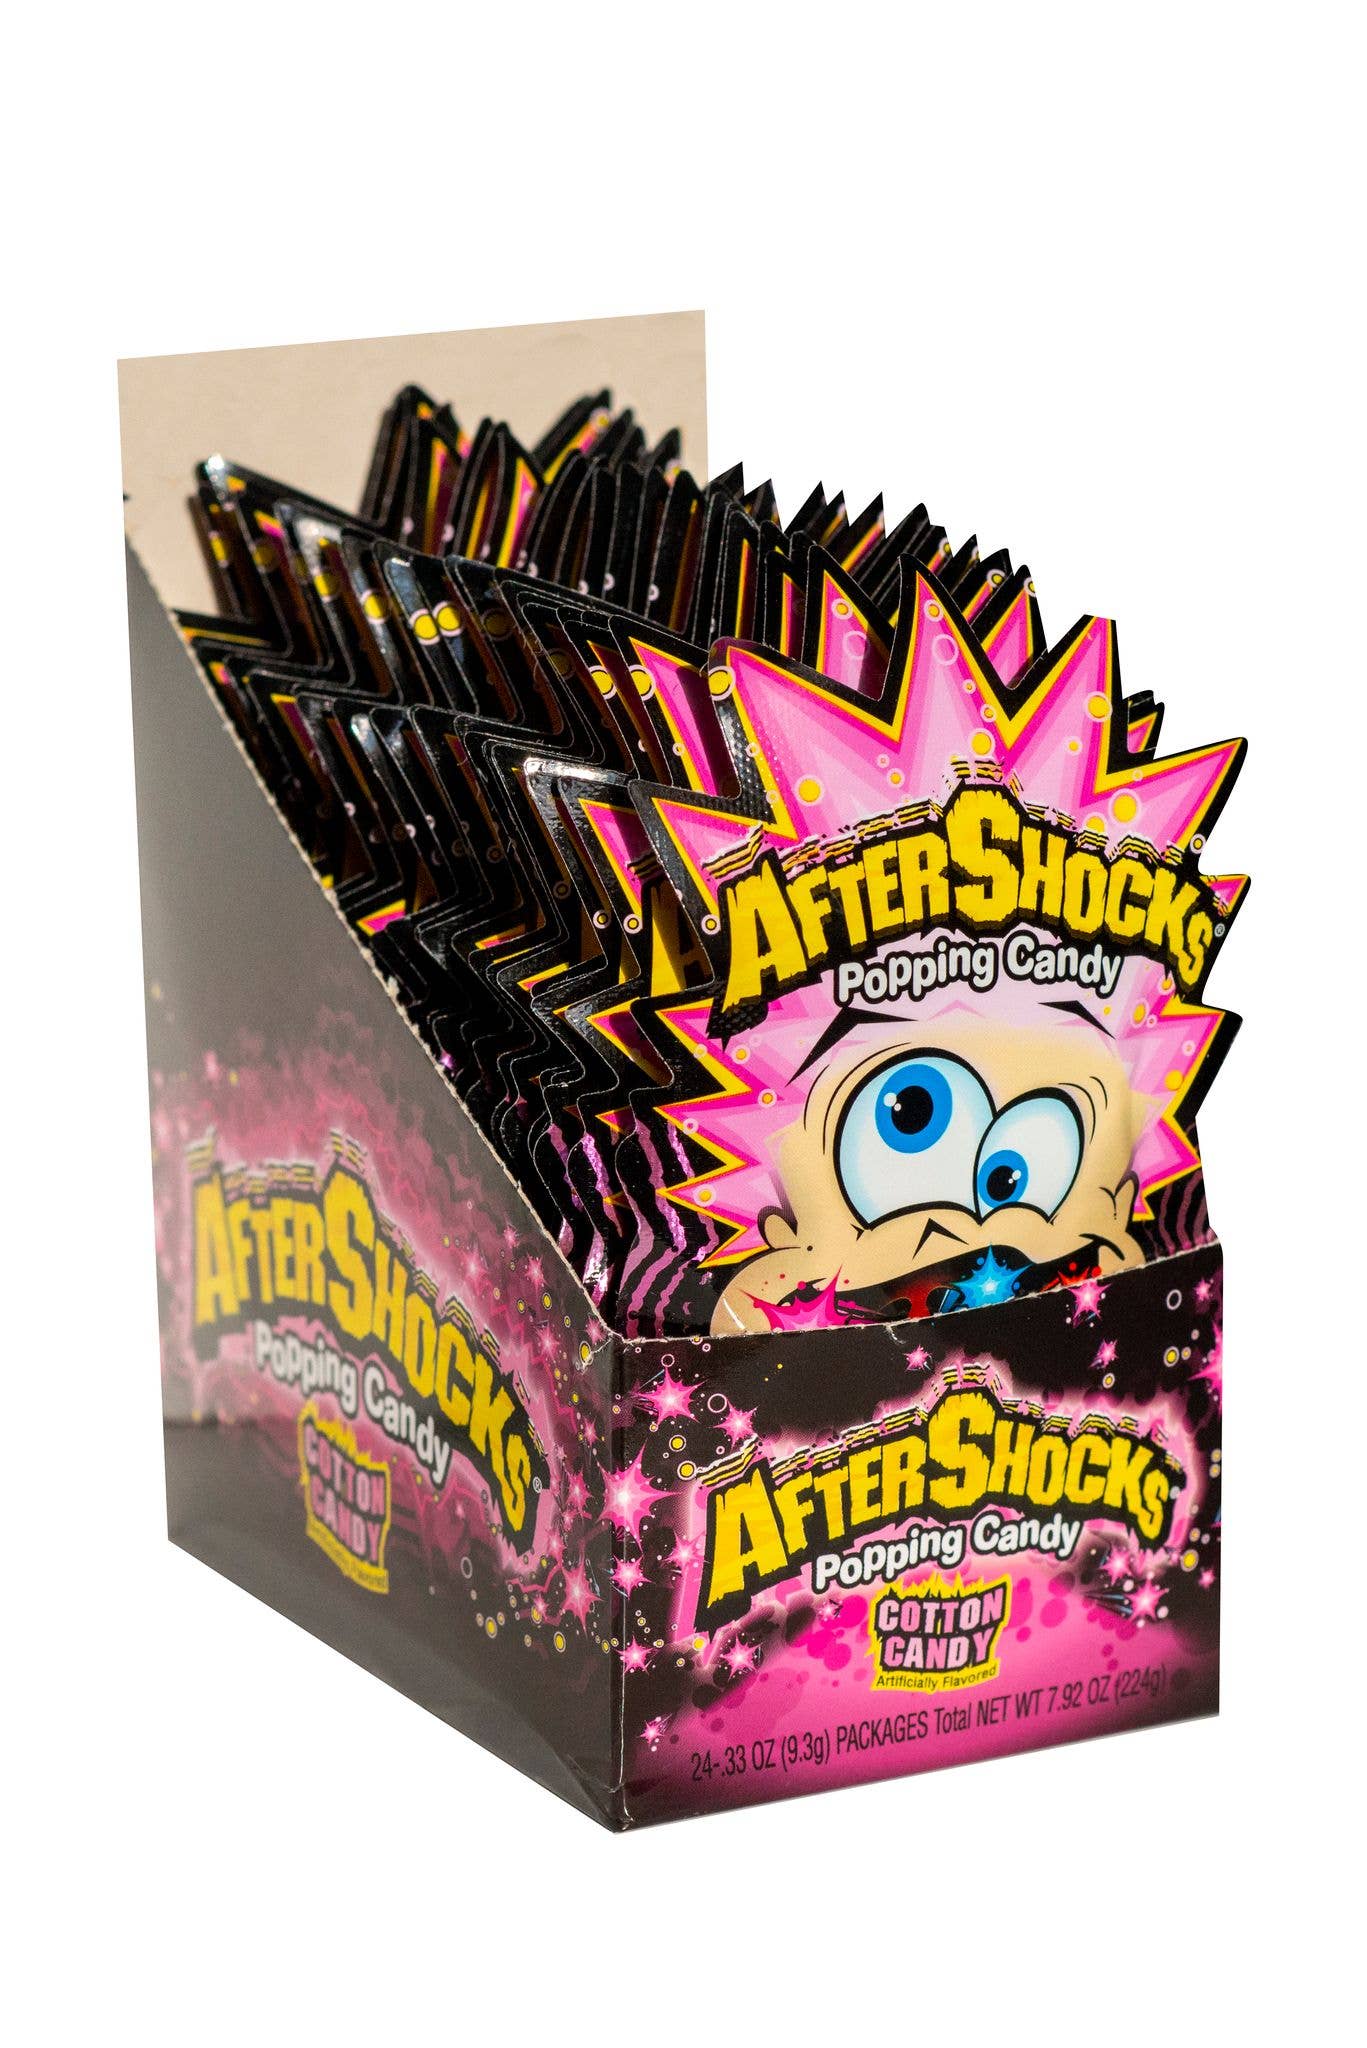 Aftershocks Popping Candy .33oz Cotton Candy Flavored